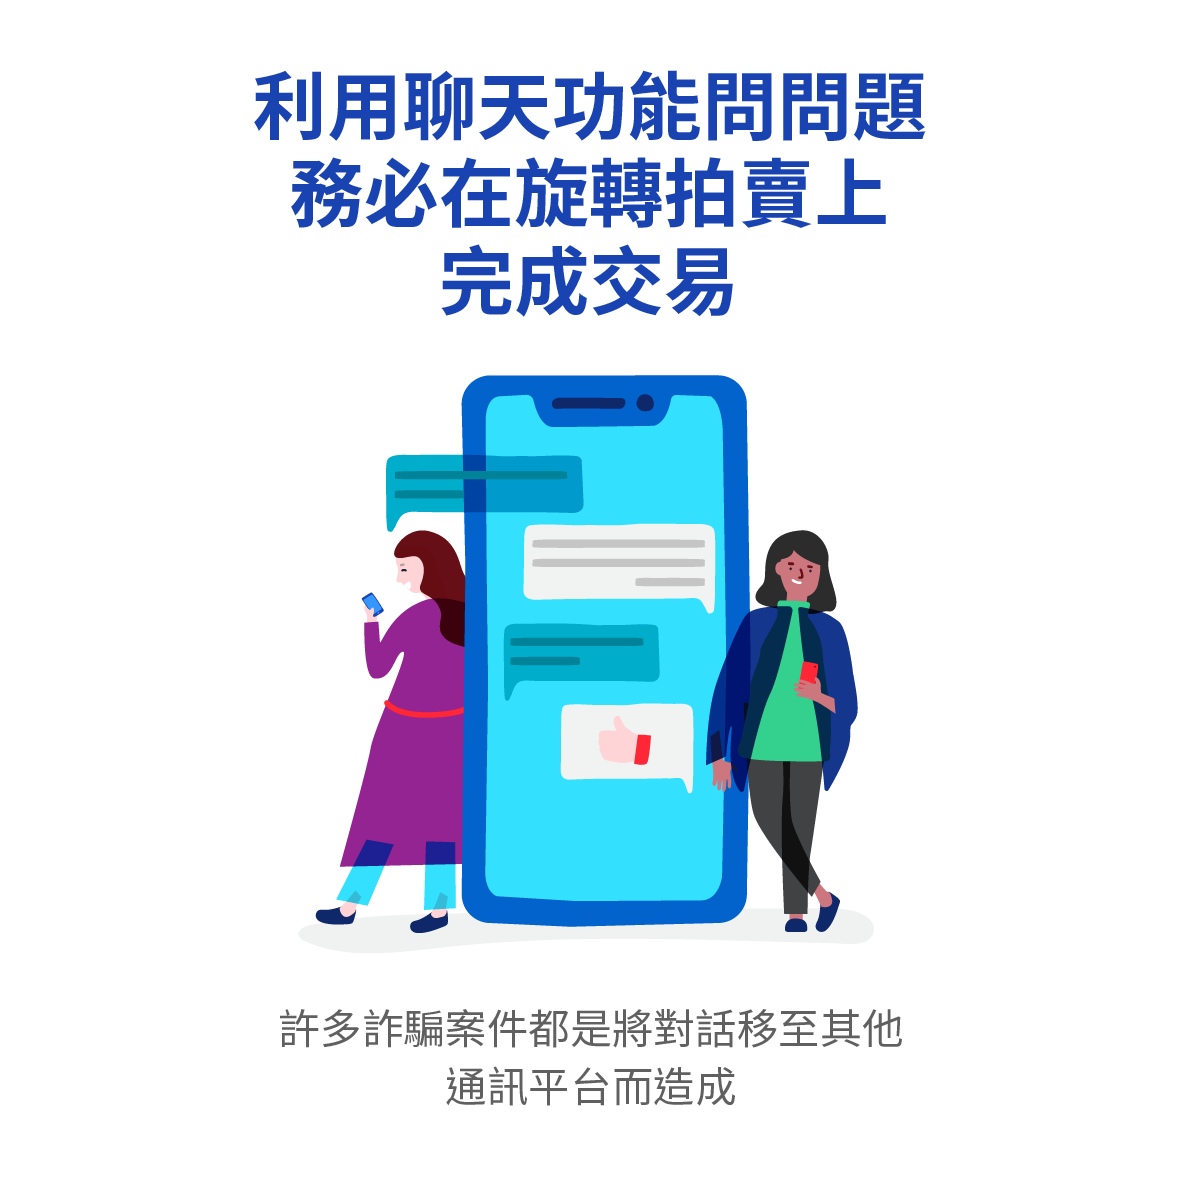 HelpCentre_How-to-deal-safely-on-Carousell_TW-2.png